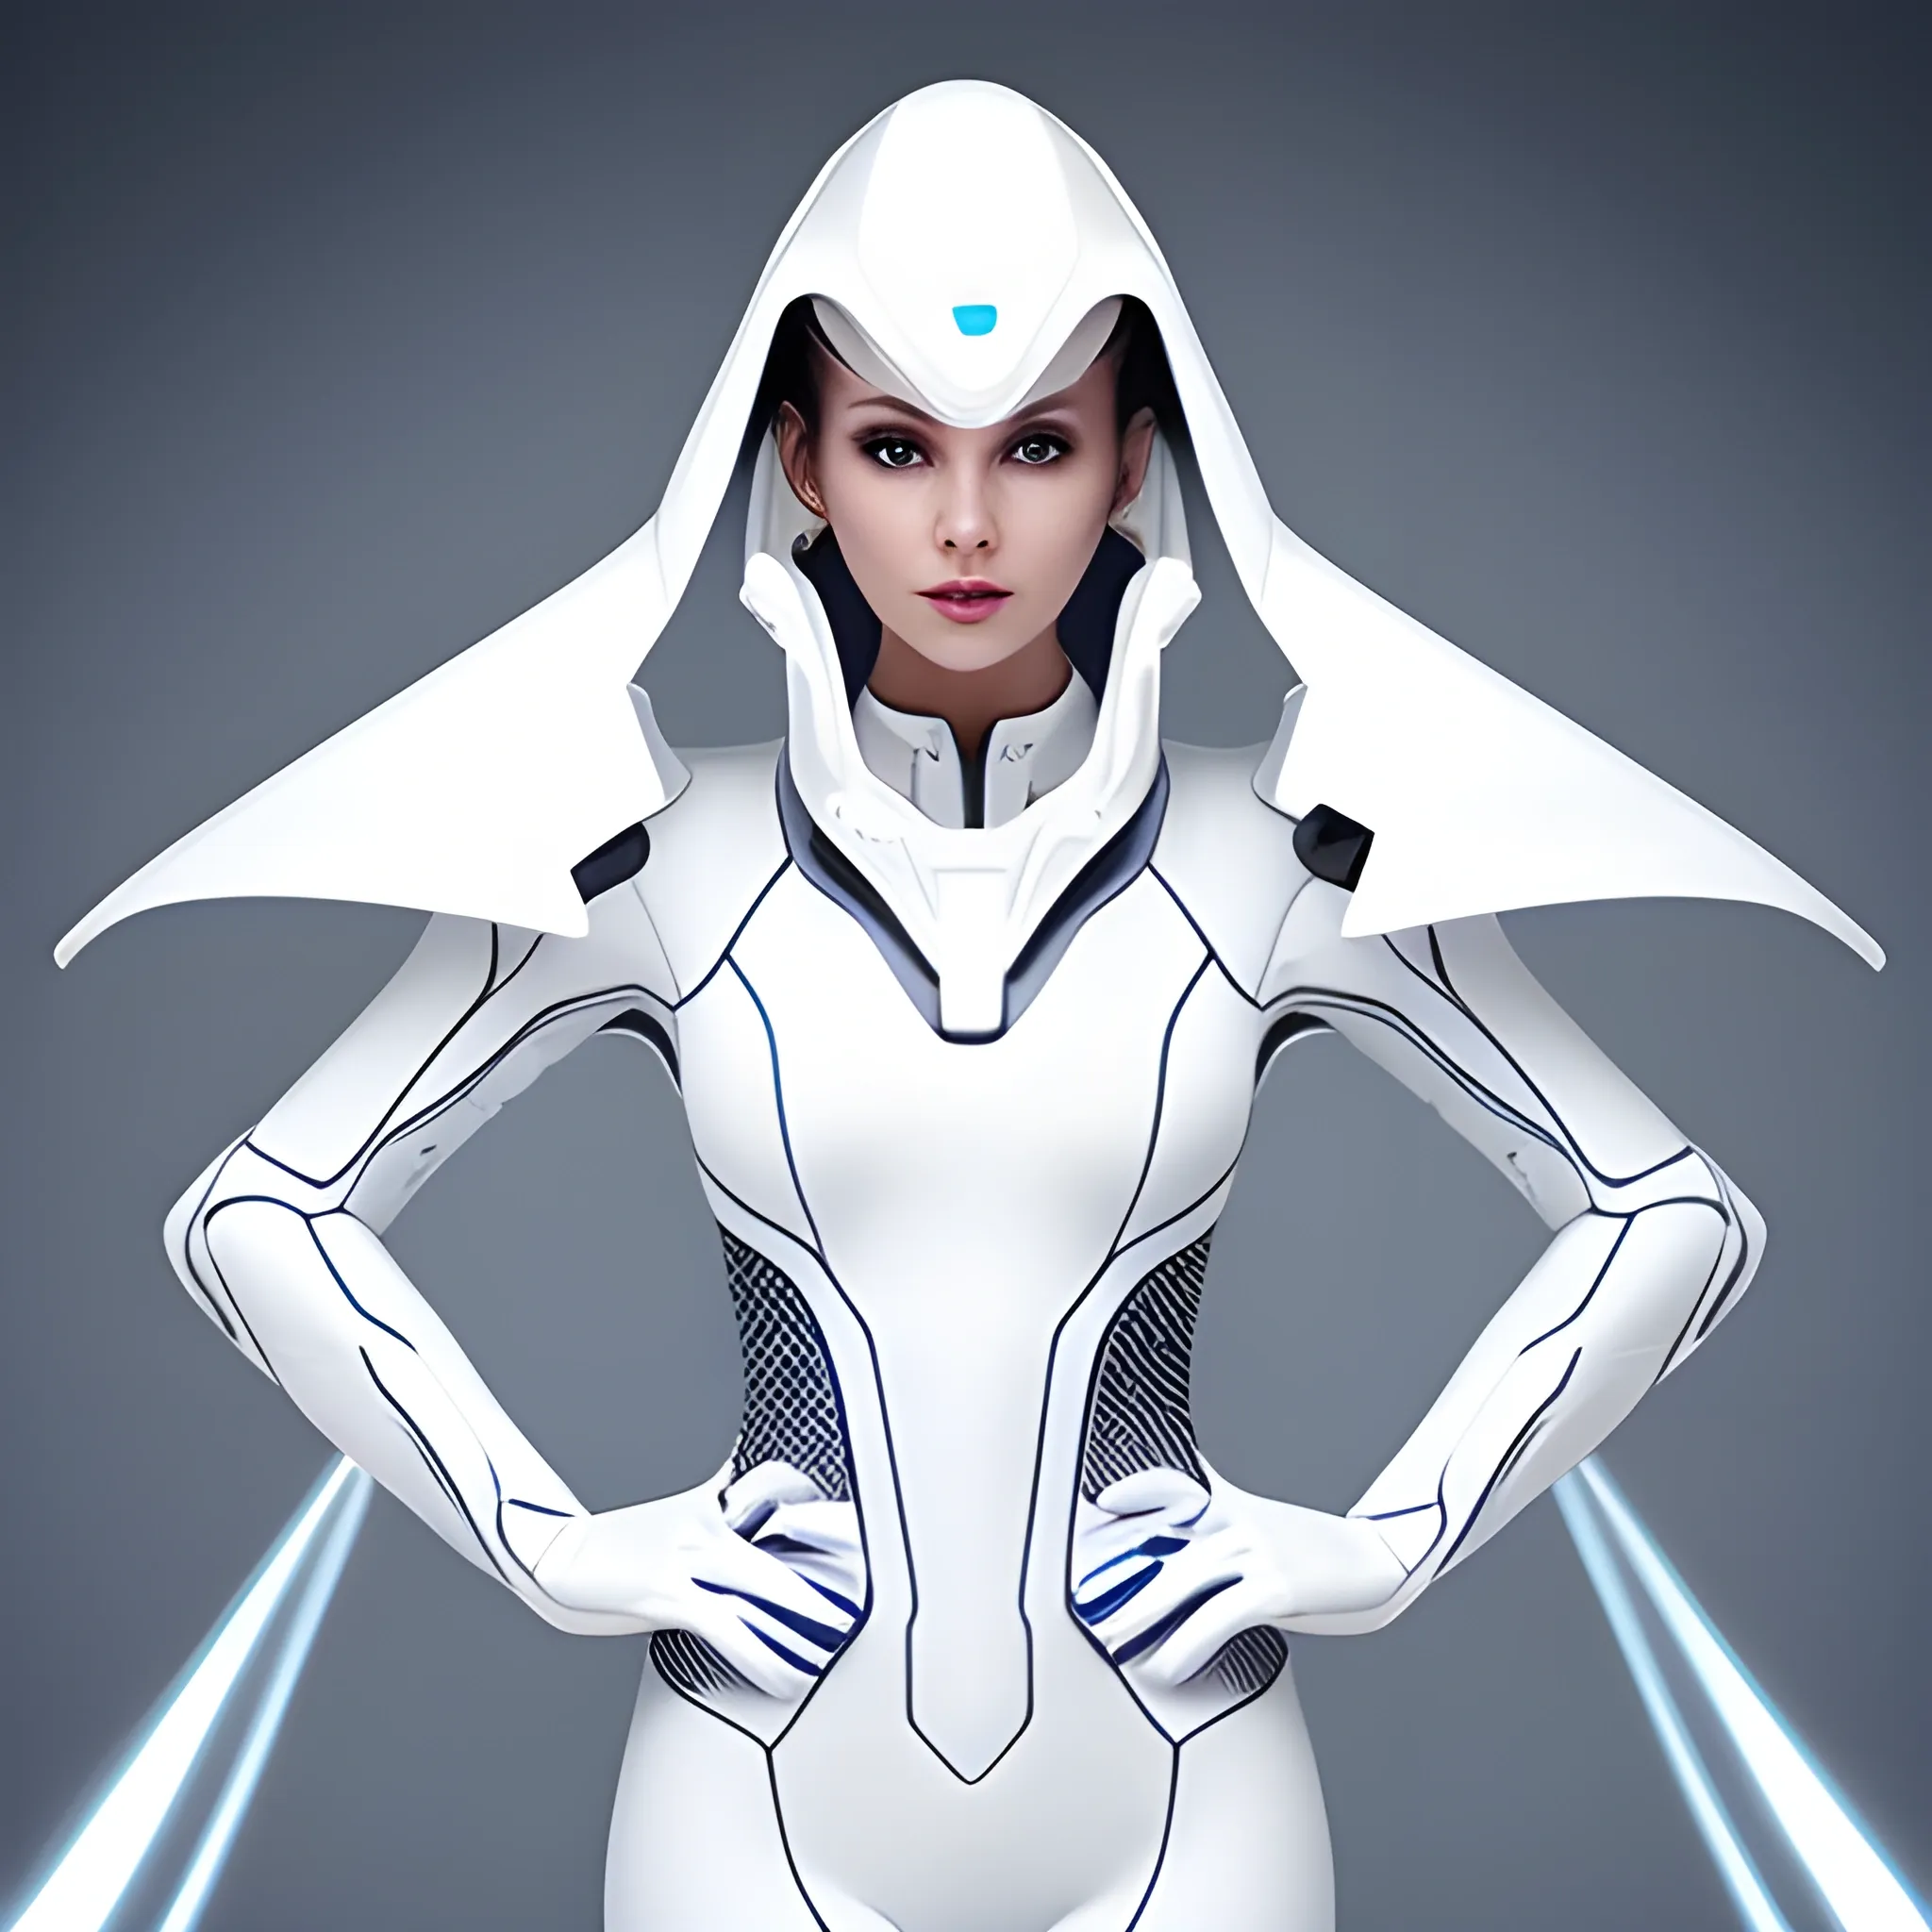 a beautiful woman dressed in futuristic white clothing